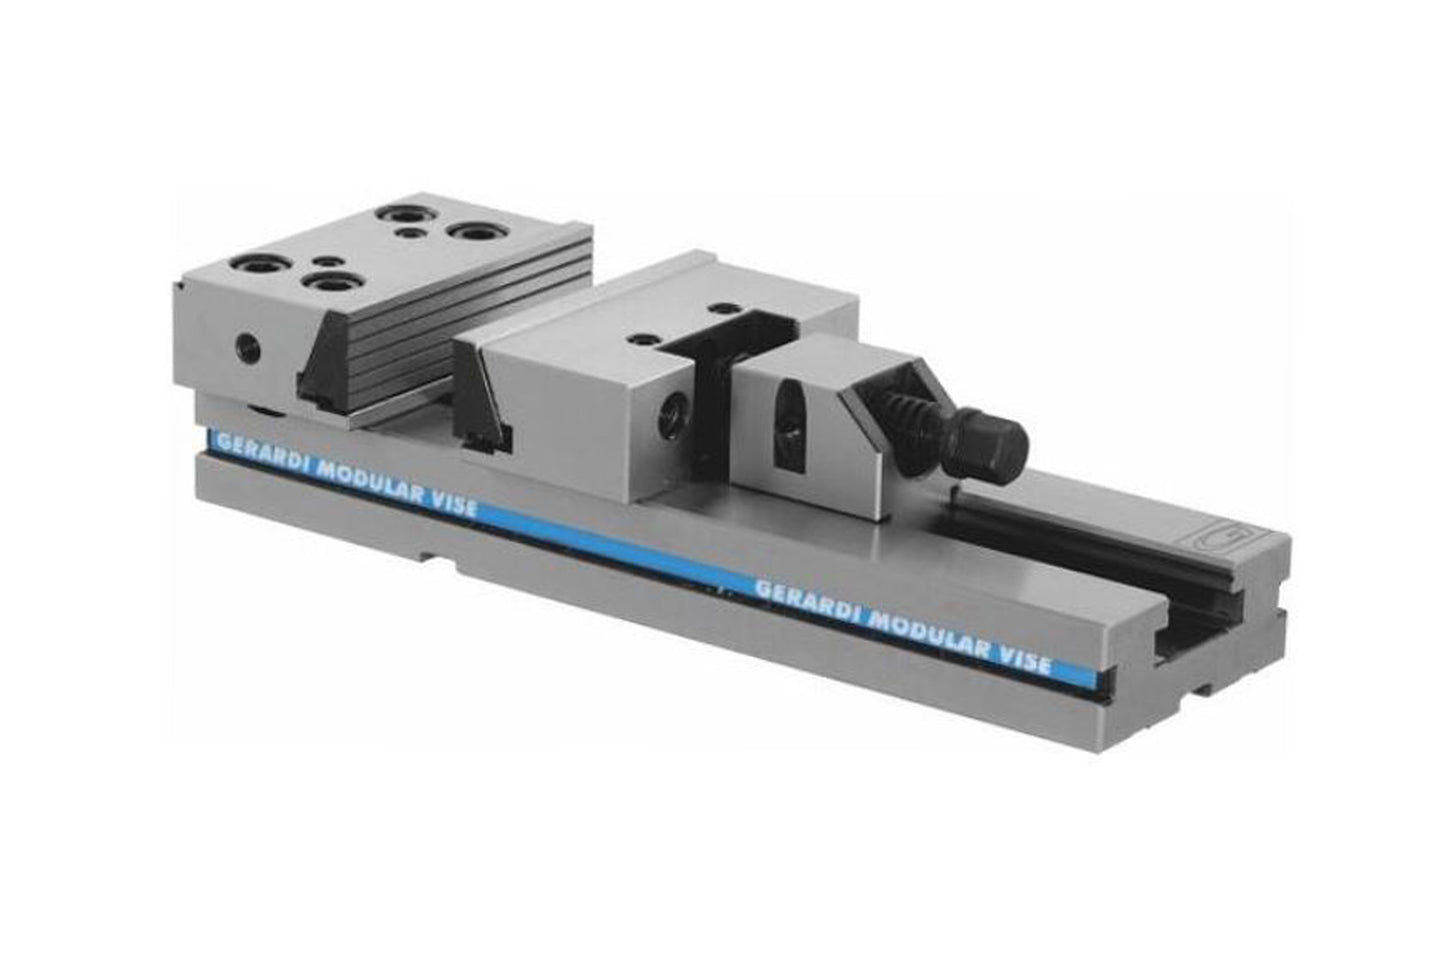 Gerardi Standard Precision Modular Vice with Solid Guided Movable Jaw (Width = 175mm, Opening = 400mm)